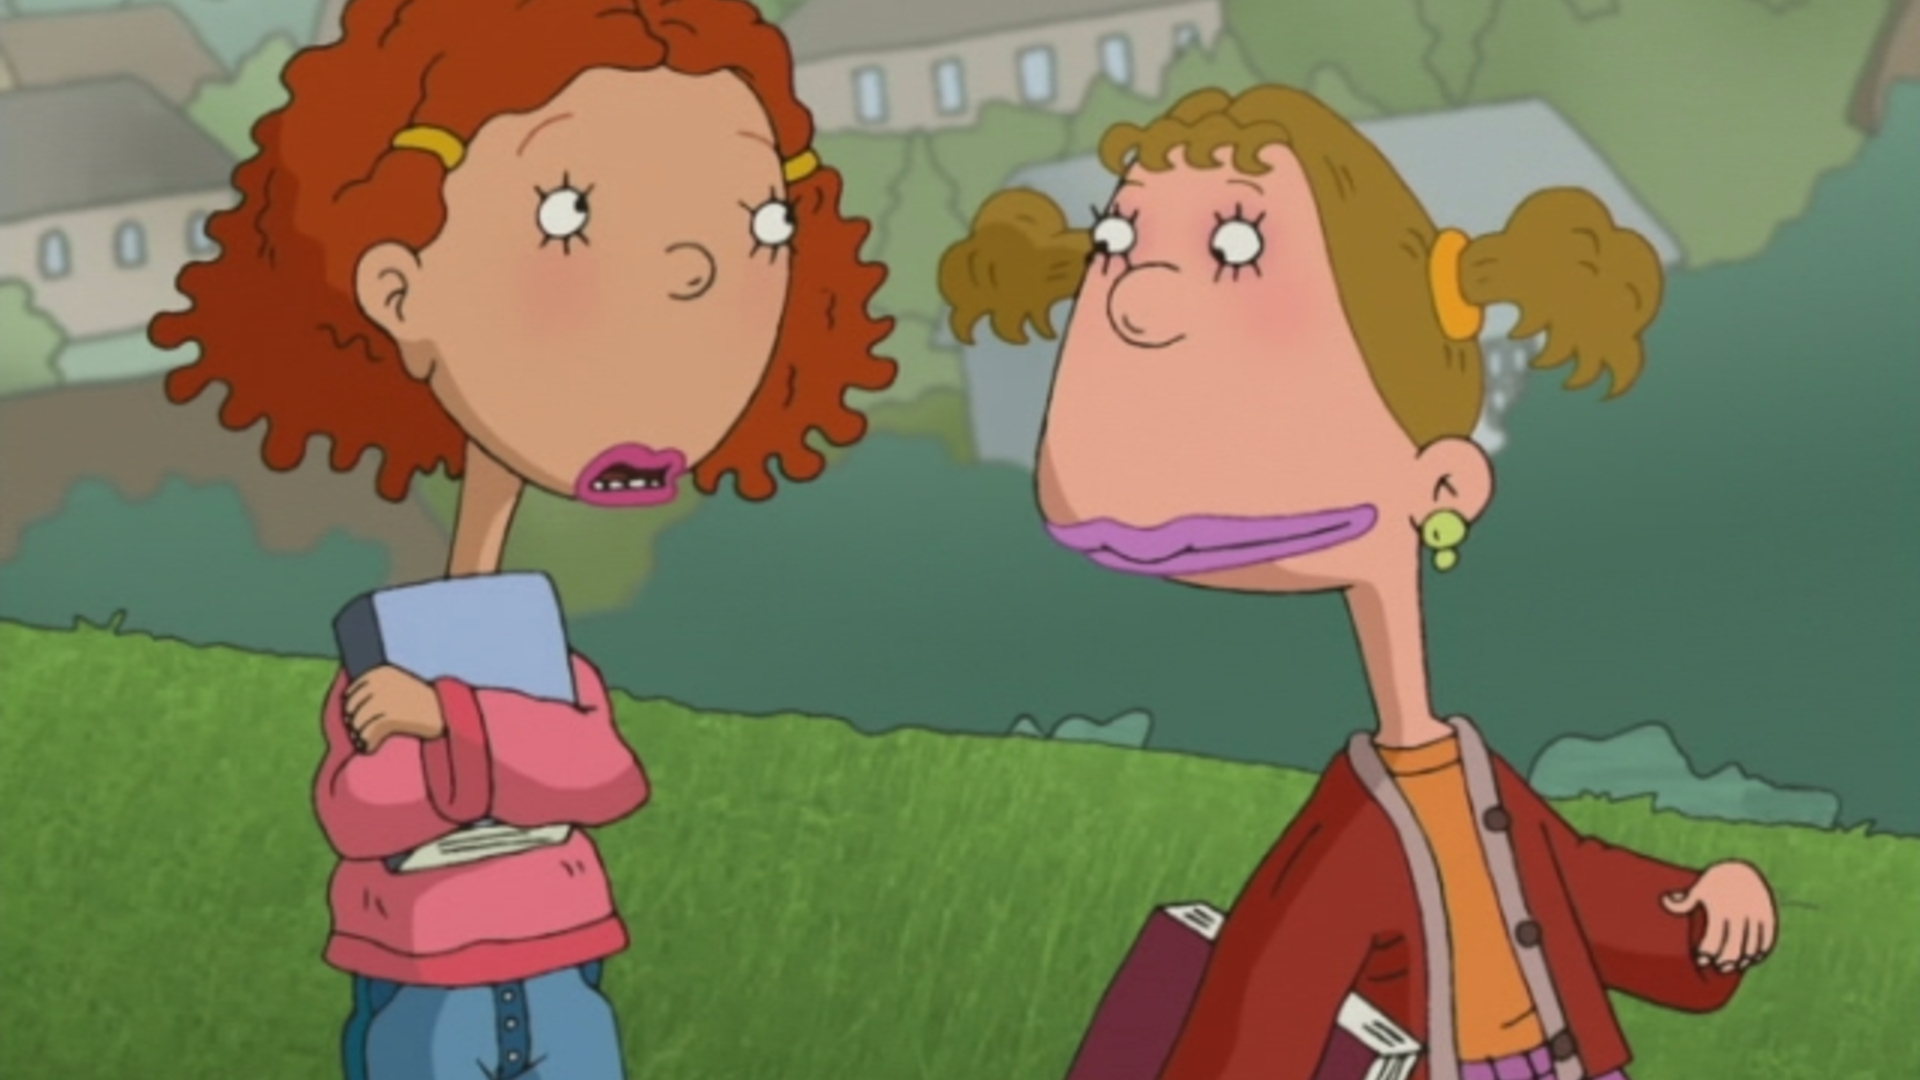 Watch As Told By Ginger Season 2 Episode 6 Sibling Revile Ry Full 